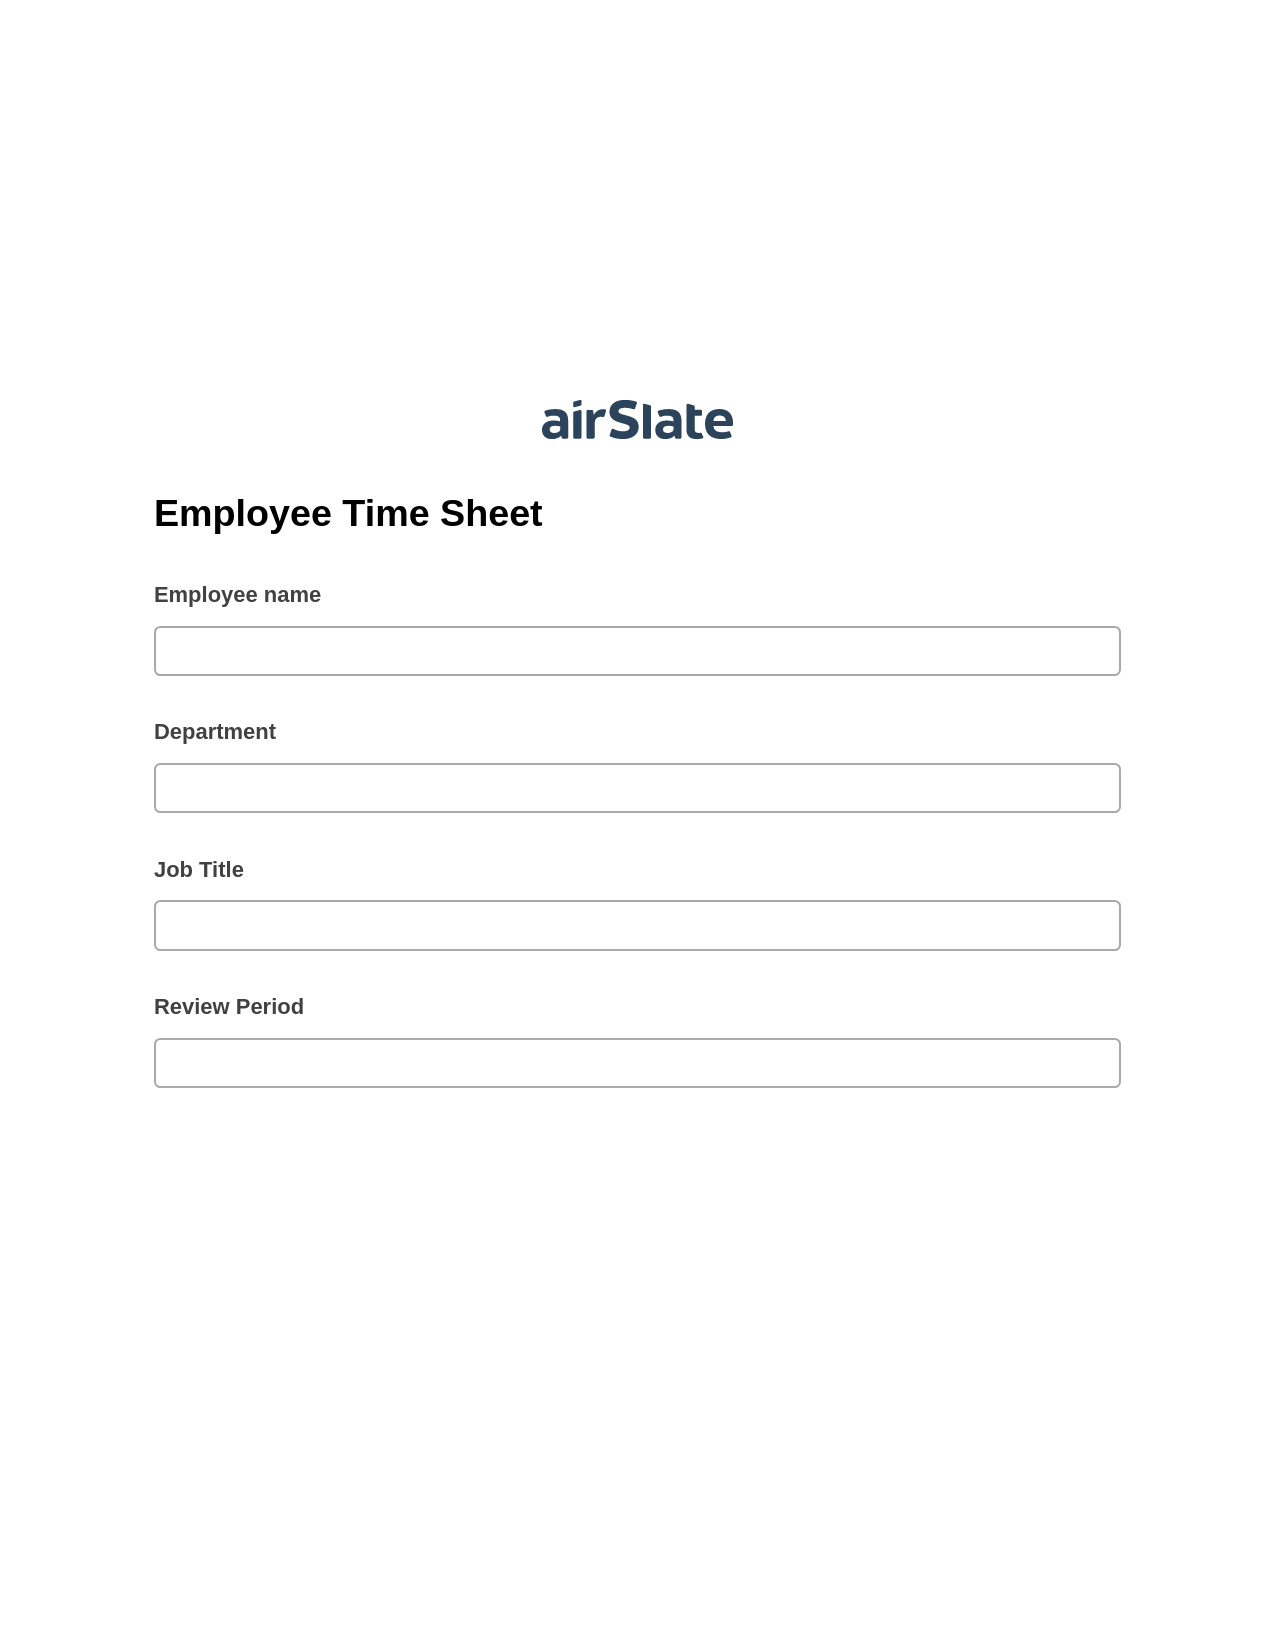 Employee Time Sheet Pre-fill from Excel Spreadsheet Bot, Send a Slate with Roles Bot, Archive to Google Drive Bot